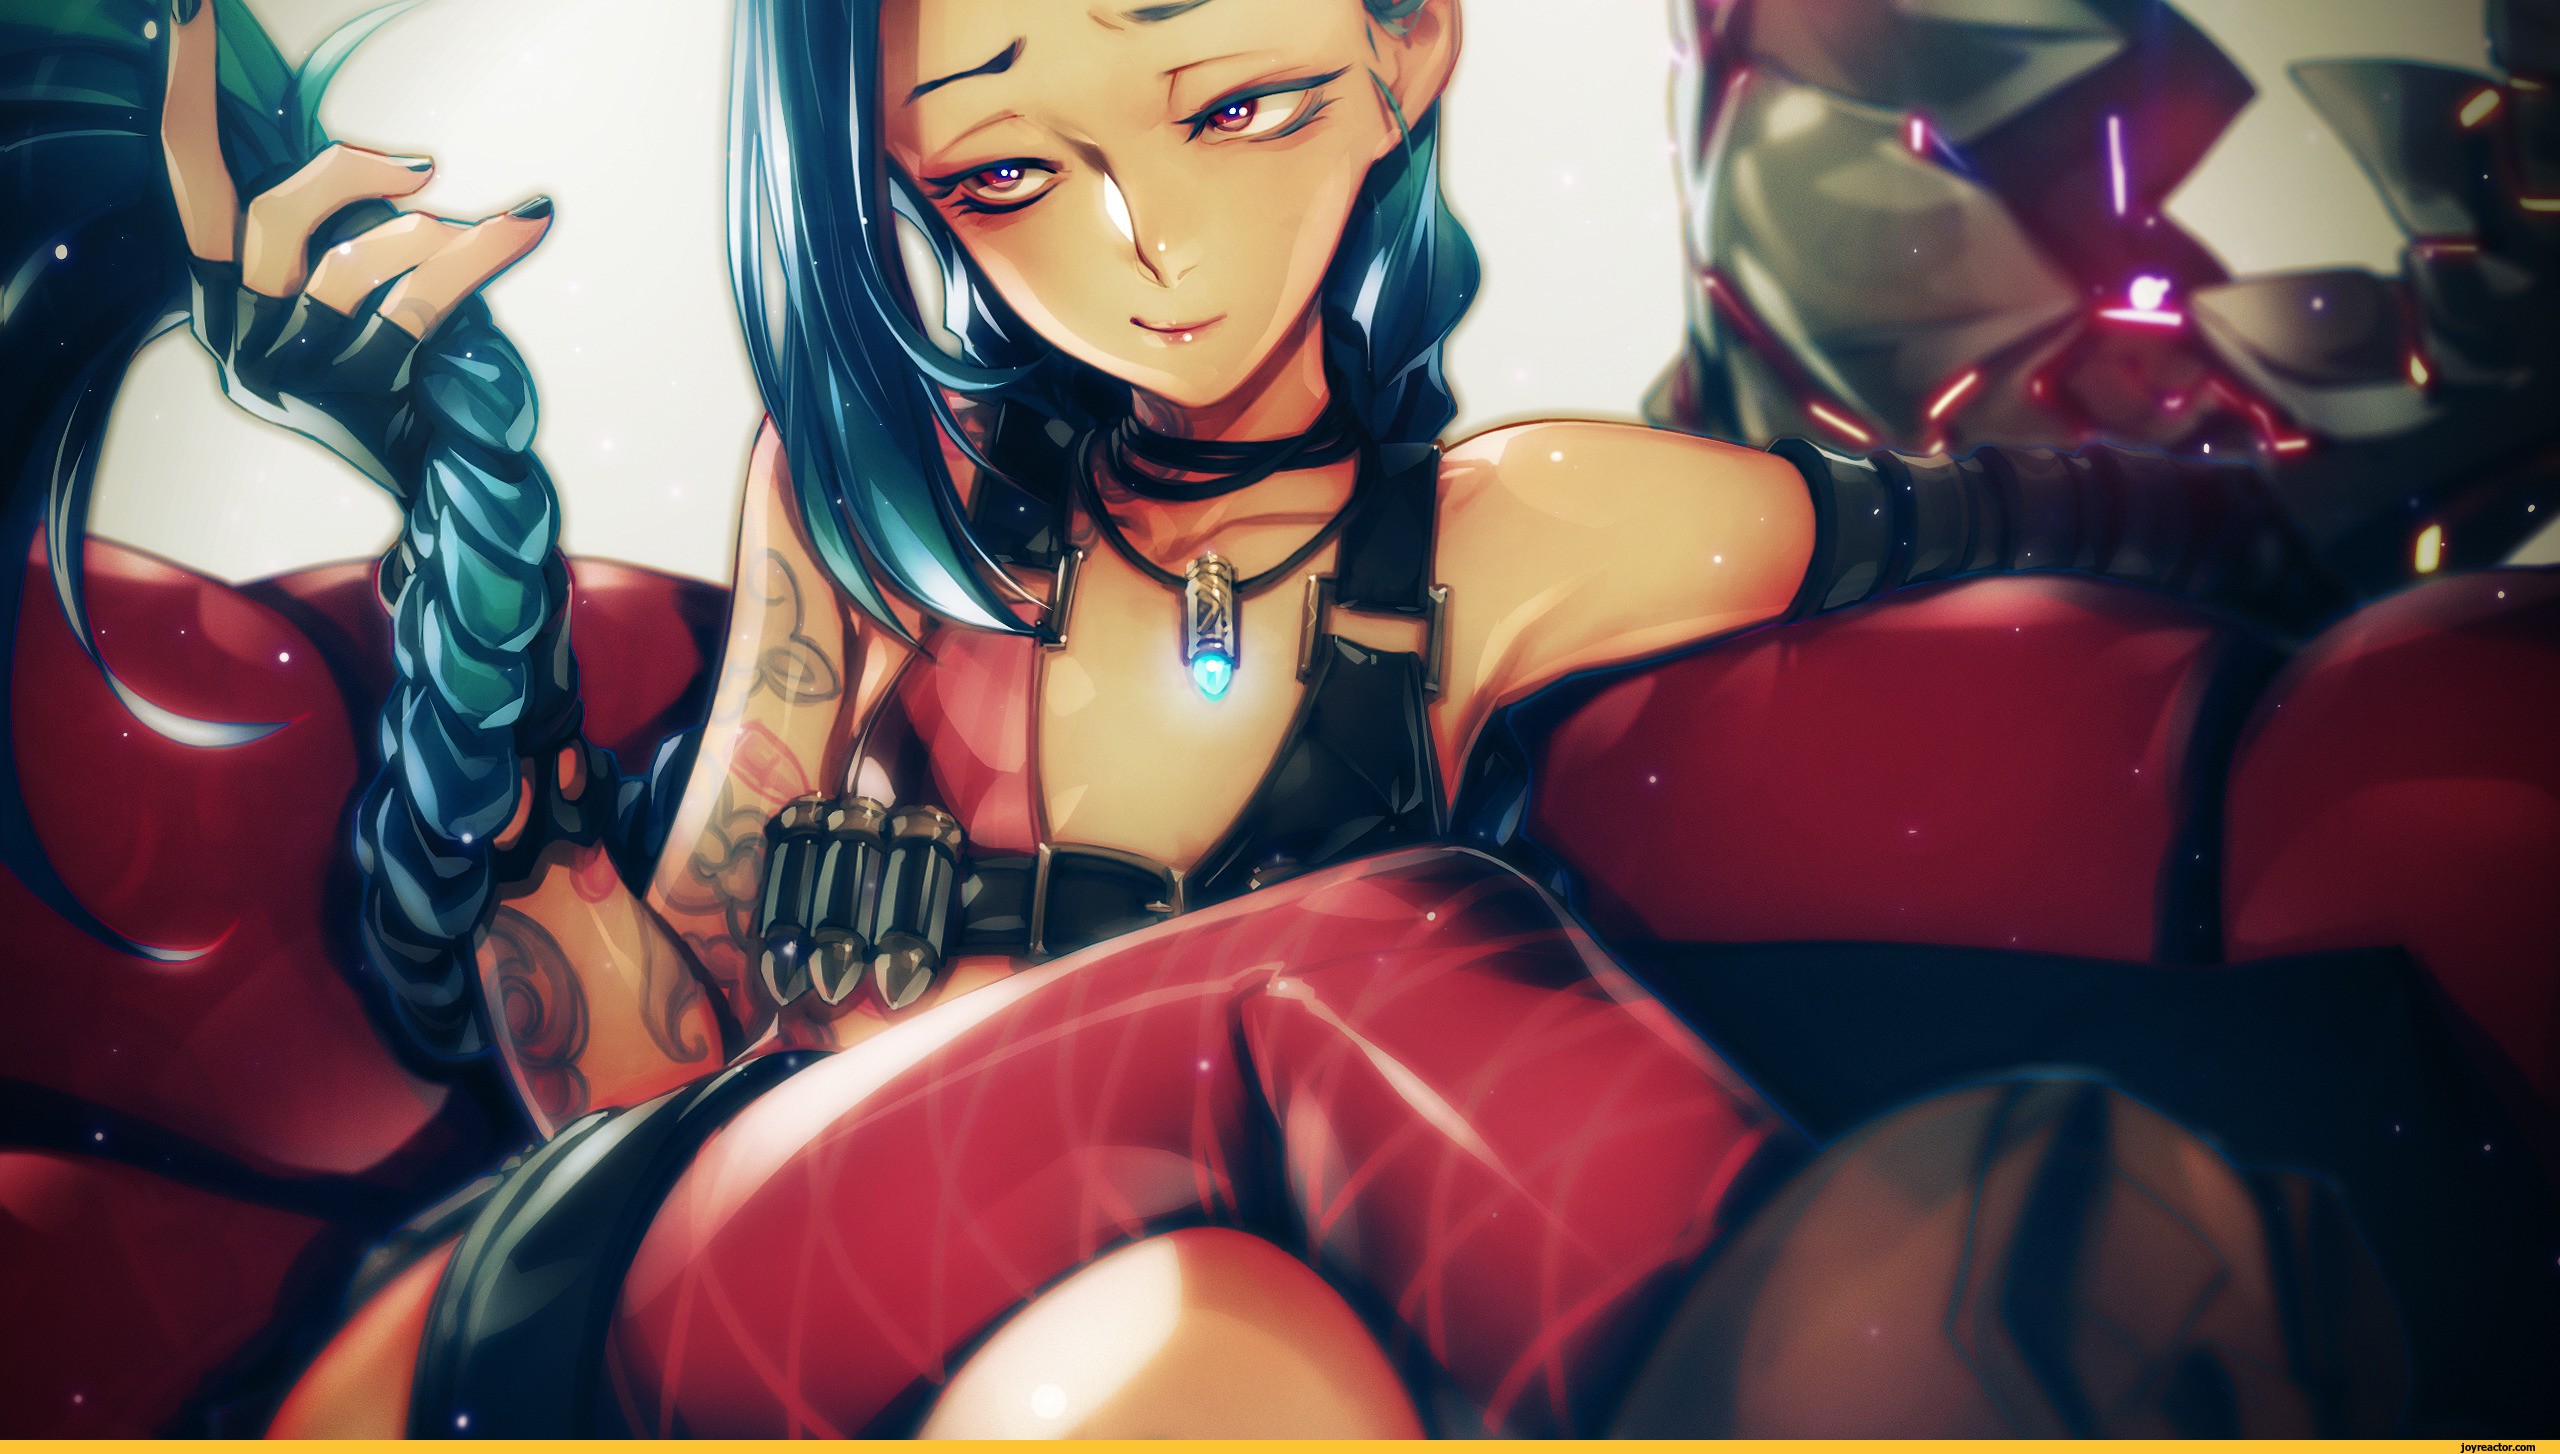 General 2560x1454 League of Legends Jinx (League of Legends) video games DeviantArt video game art PC gaming video game girls dark hair painted nails black nails necklace legs crossed red eyes women video game characters